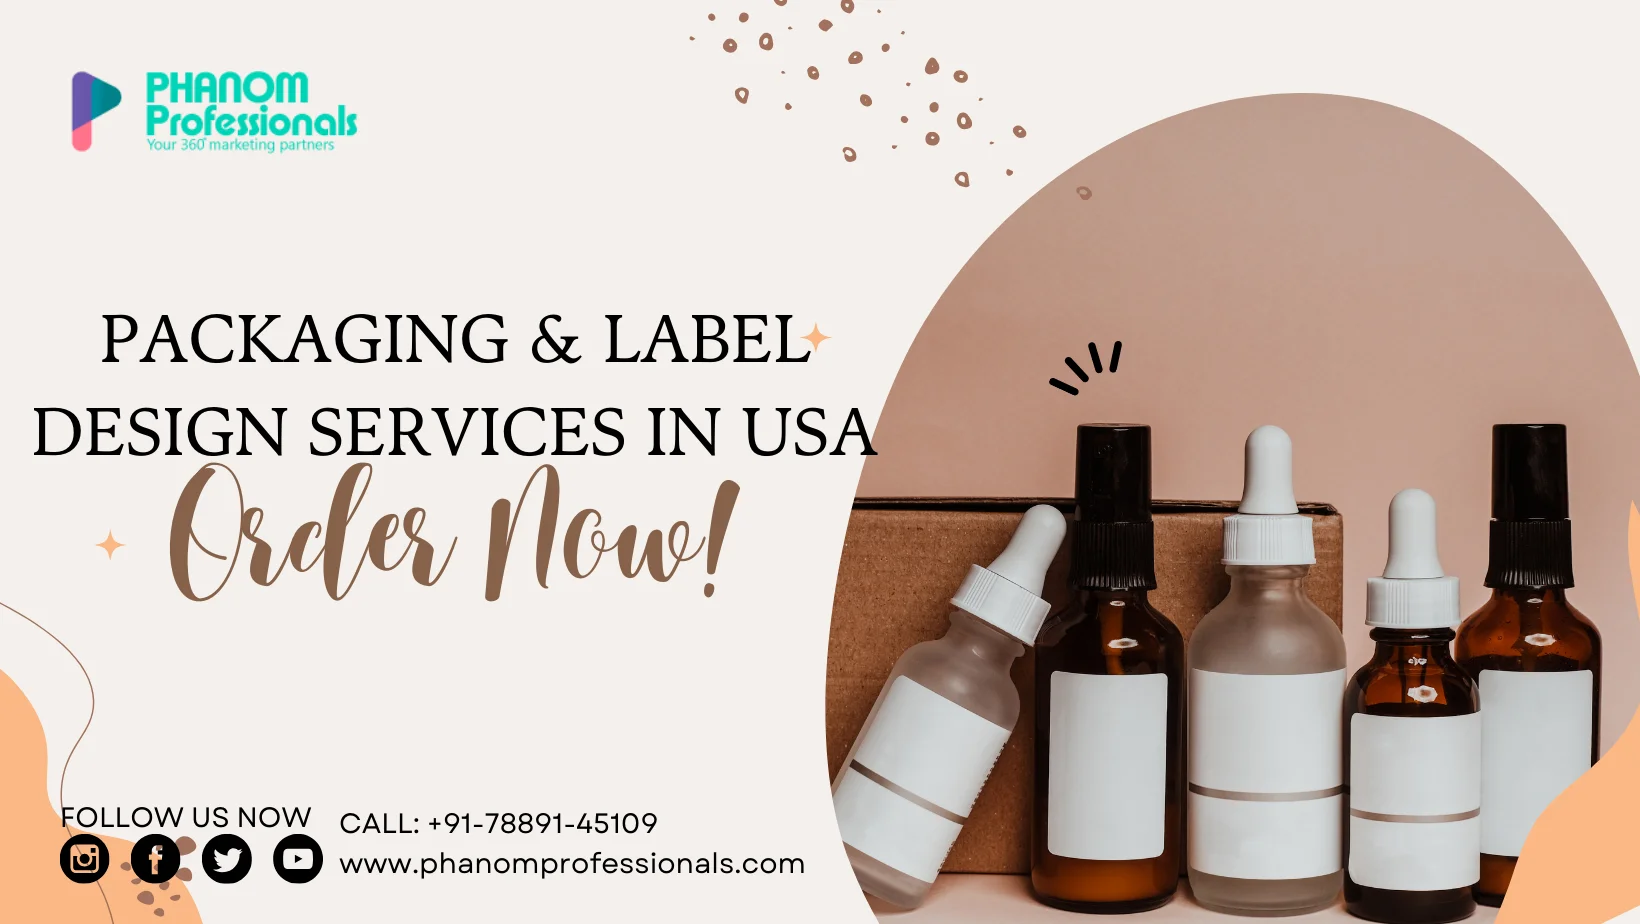 Packaging & Label Design Services in USA